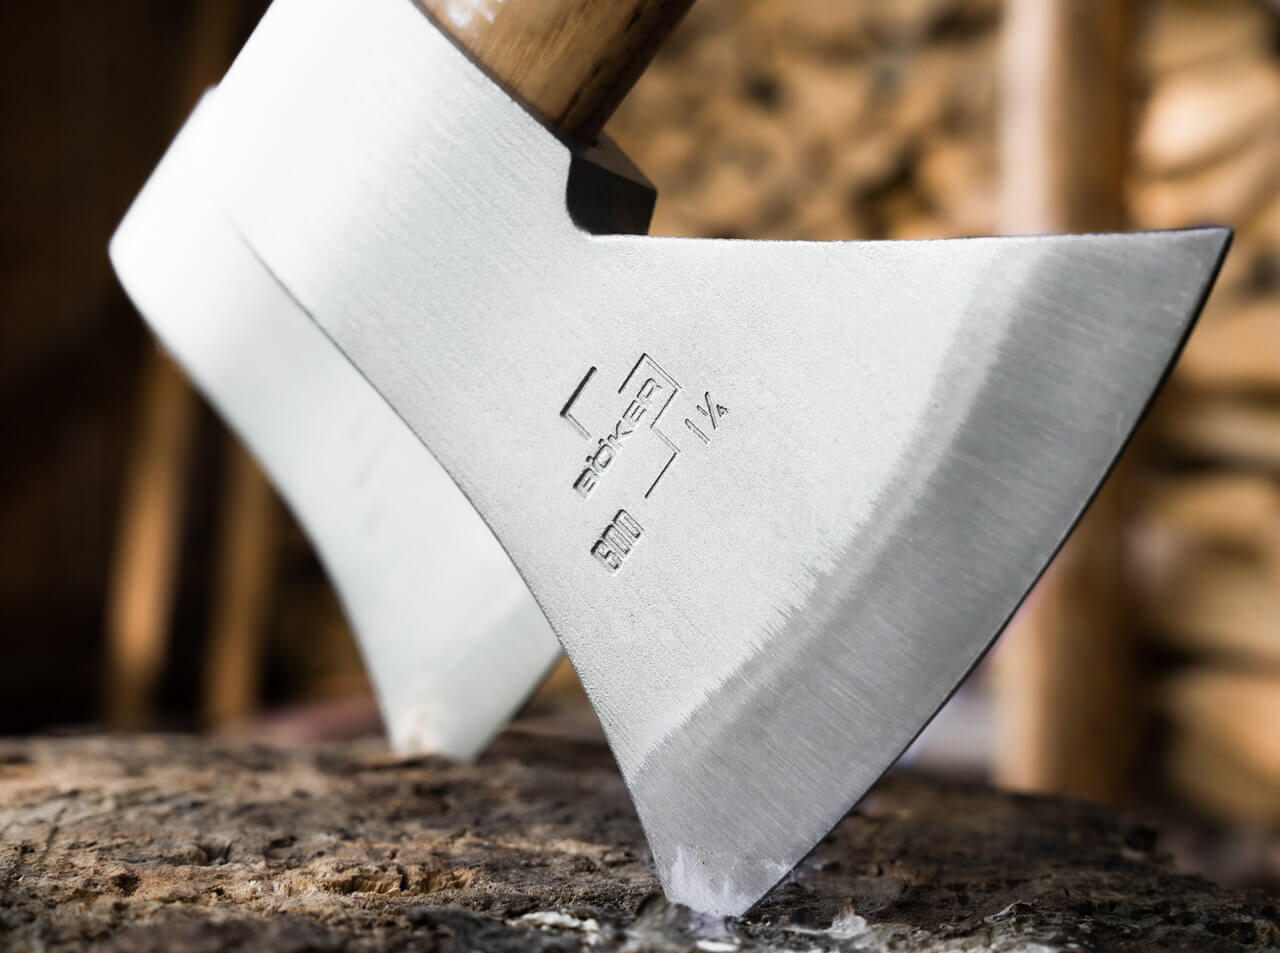 Knife & Axe Accessories – Appalachian Outfitters